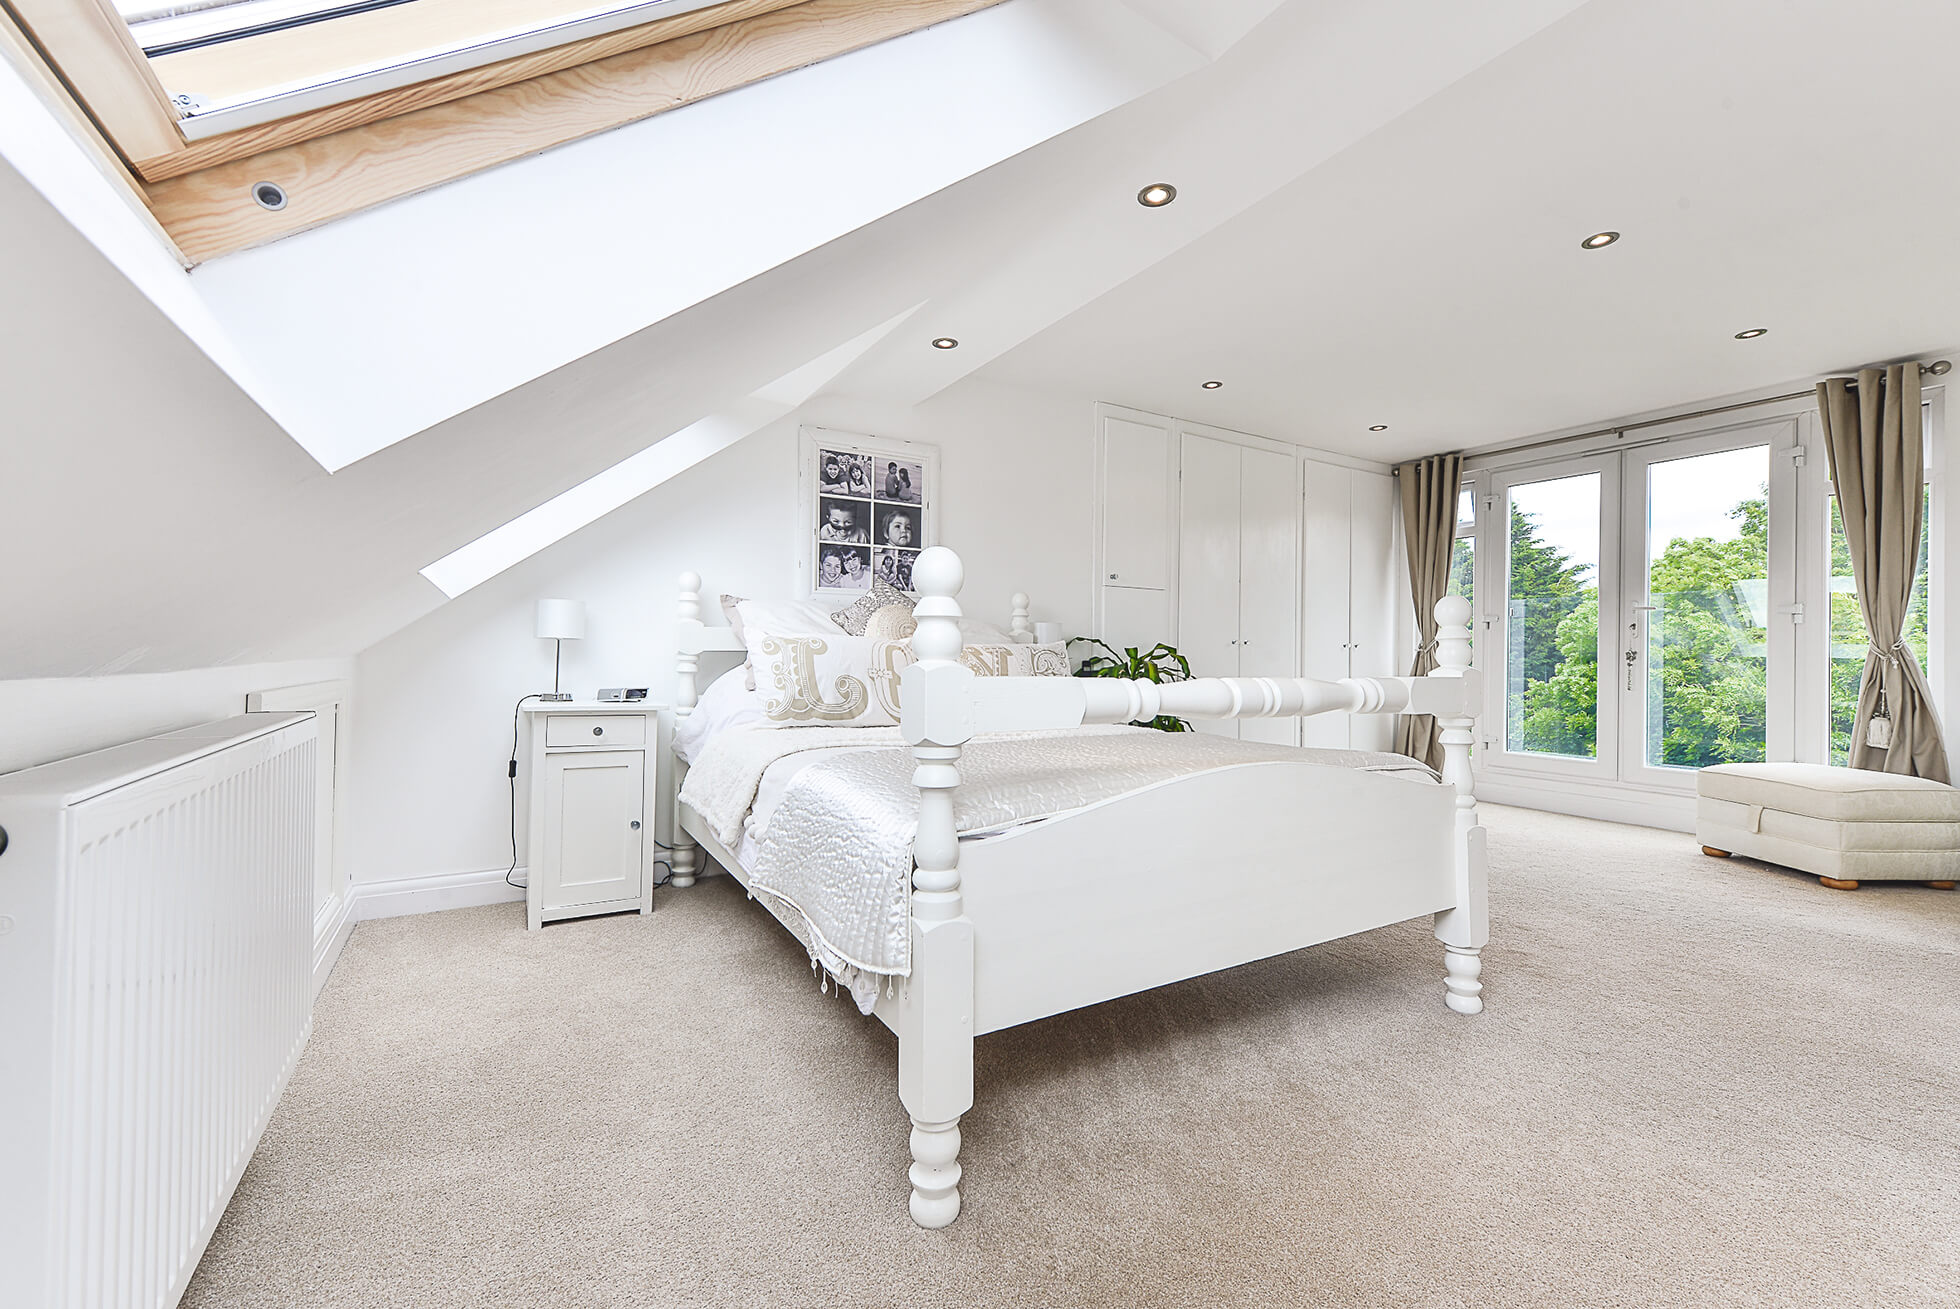 Do you have a question about converting your Loft in Colney Heath? Here are the most popular questions asked by our clients.